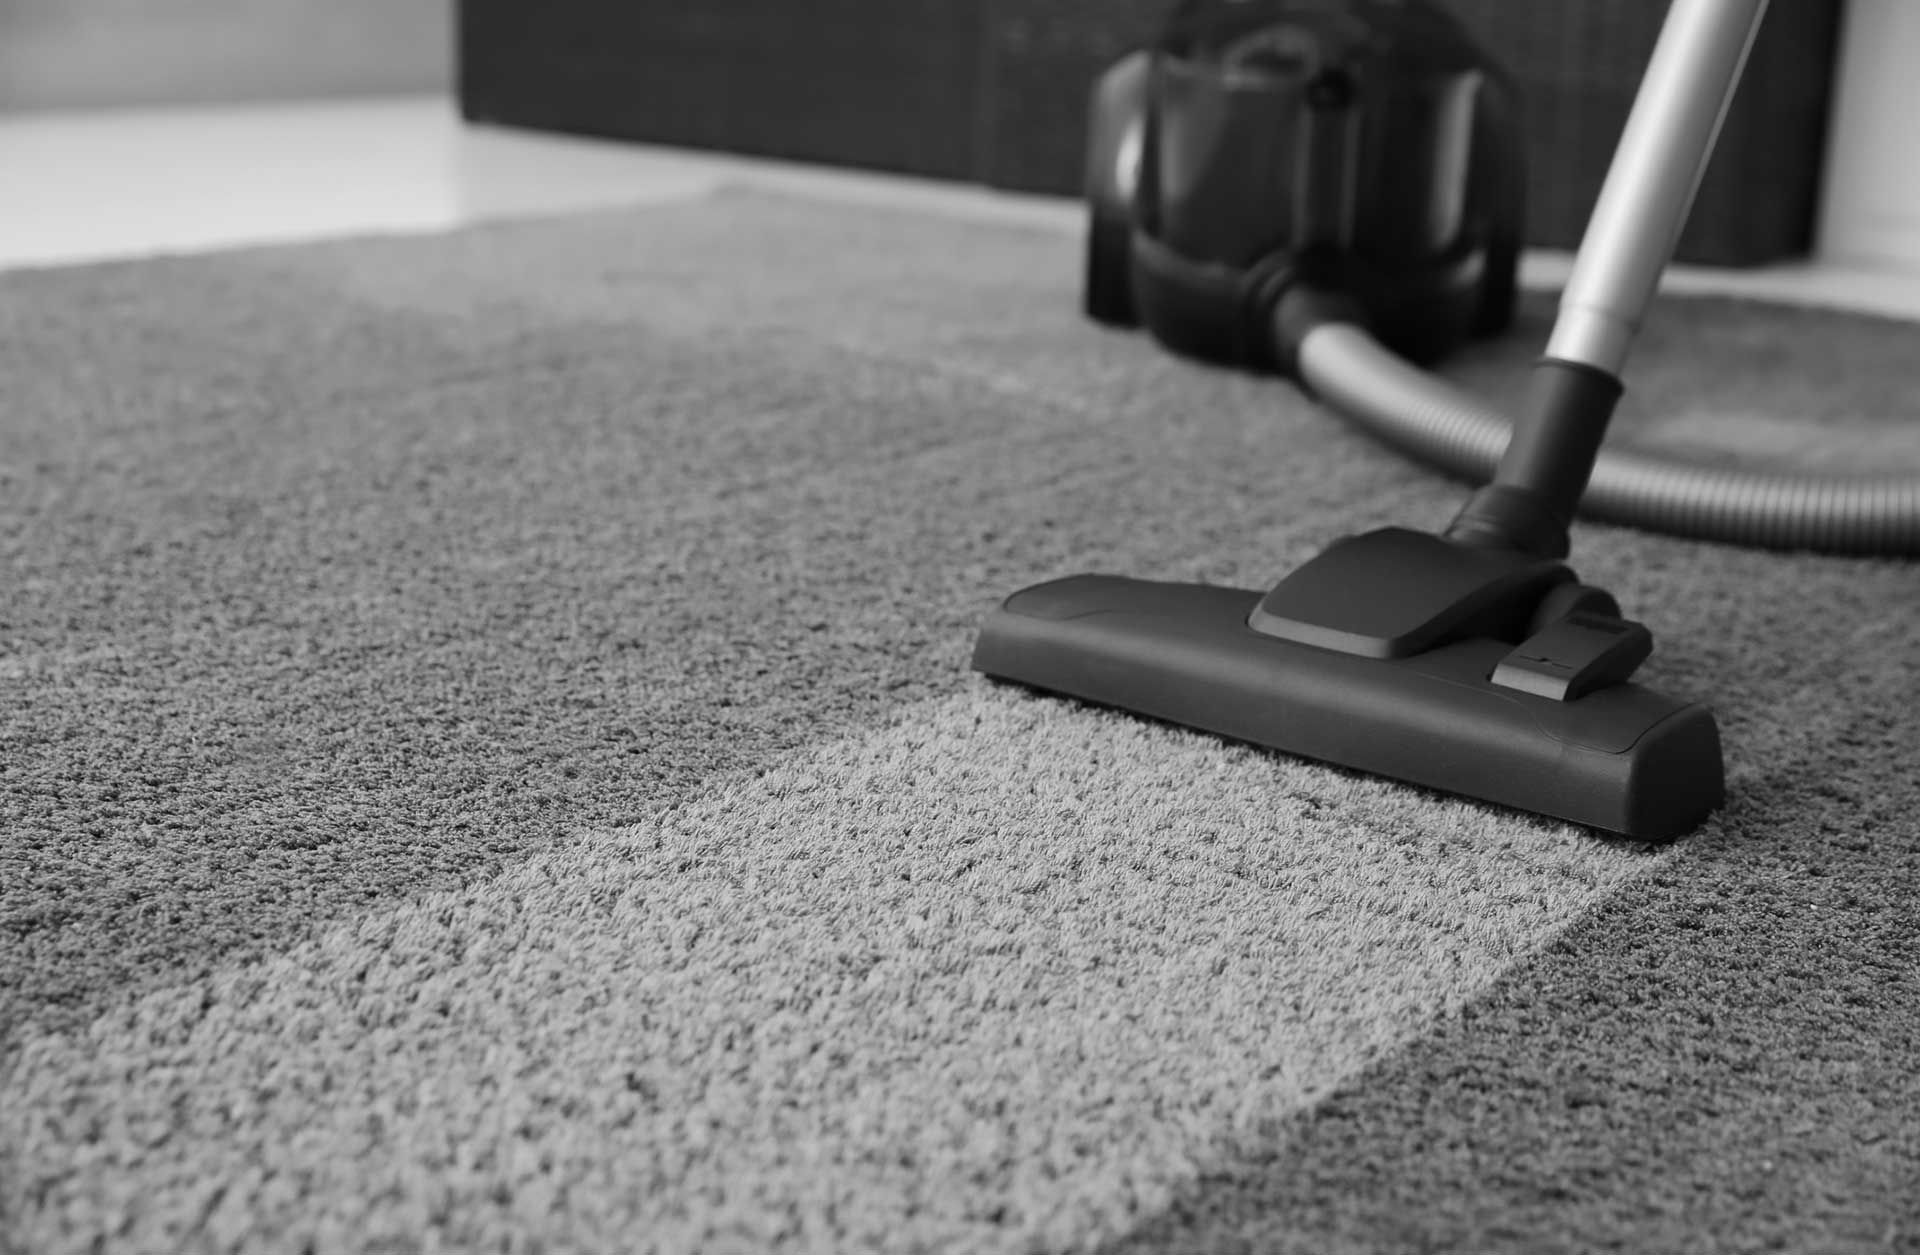 dramatic difference in carpet appearance from professional cleaning